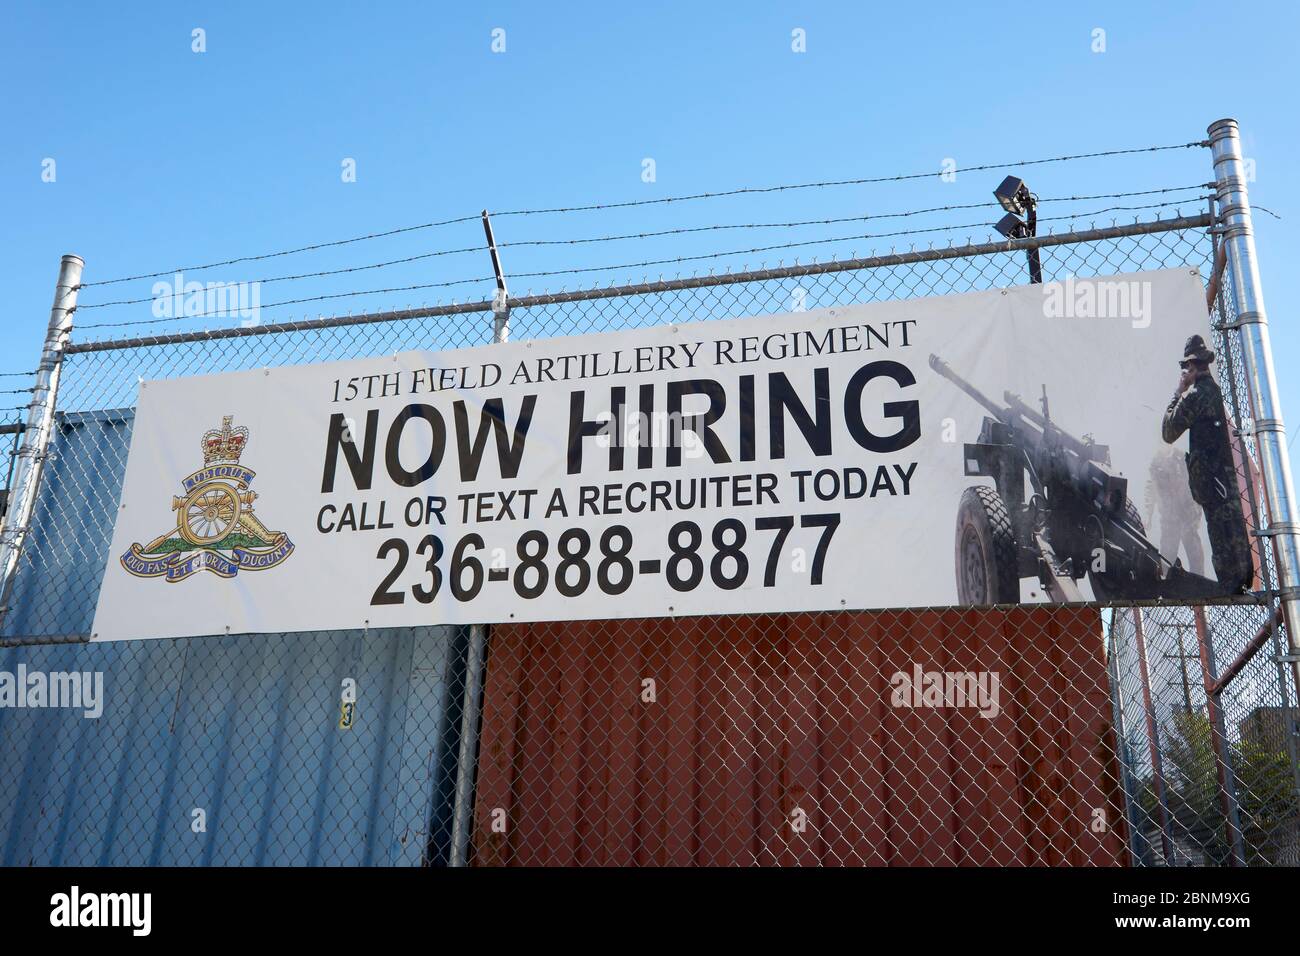 Recruiting sign for 15th Field Artillery Regiment of the Canadian Armed Forces, Vancouver, BC, Canada Stock Photo